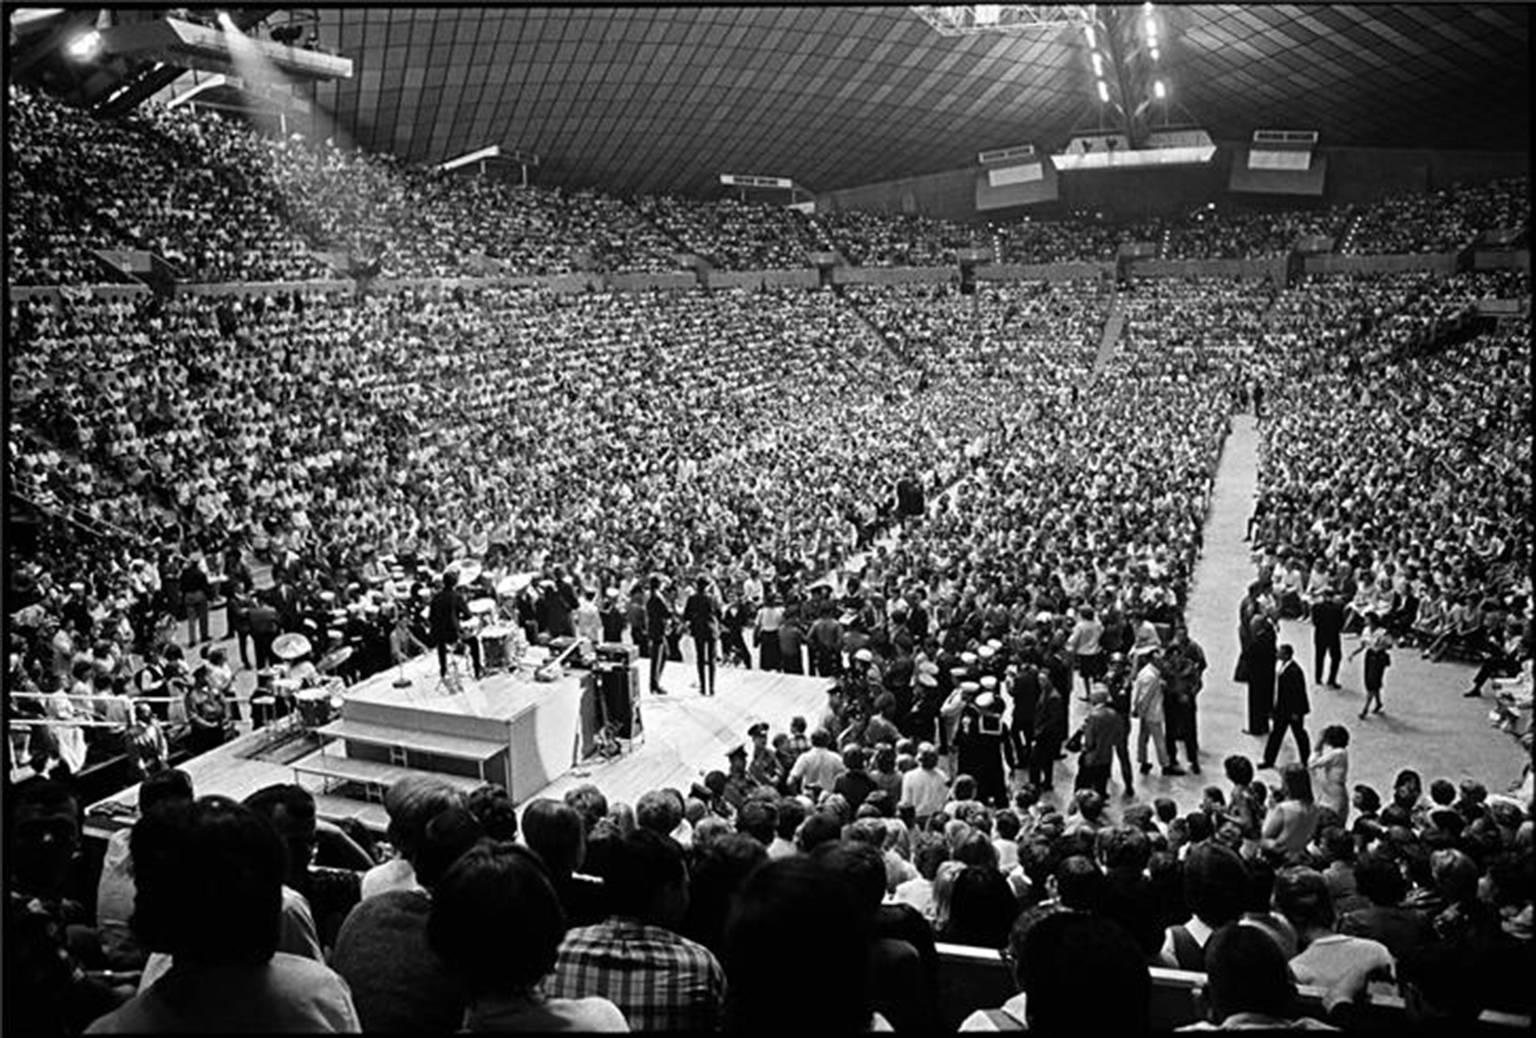 Curt Gunther Black and White Photograph - The Beatles in an Arena